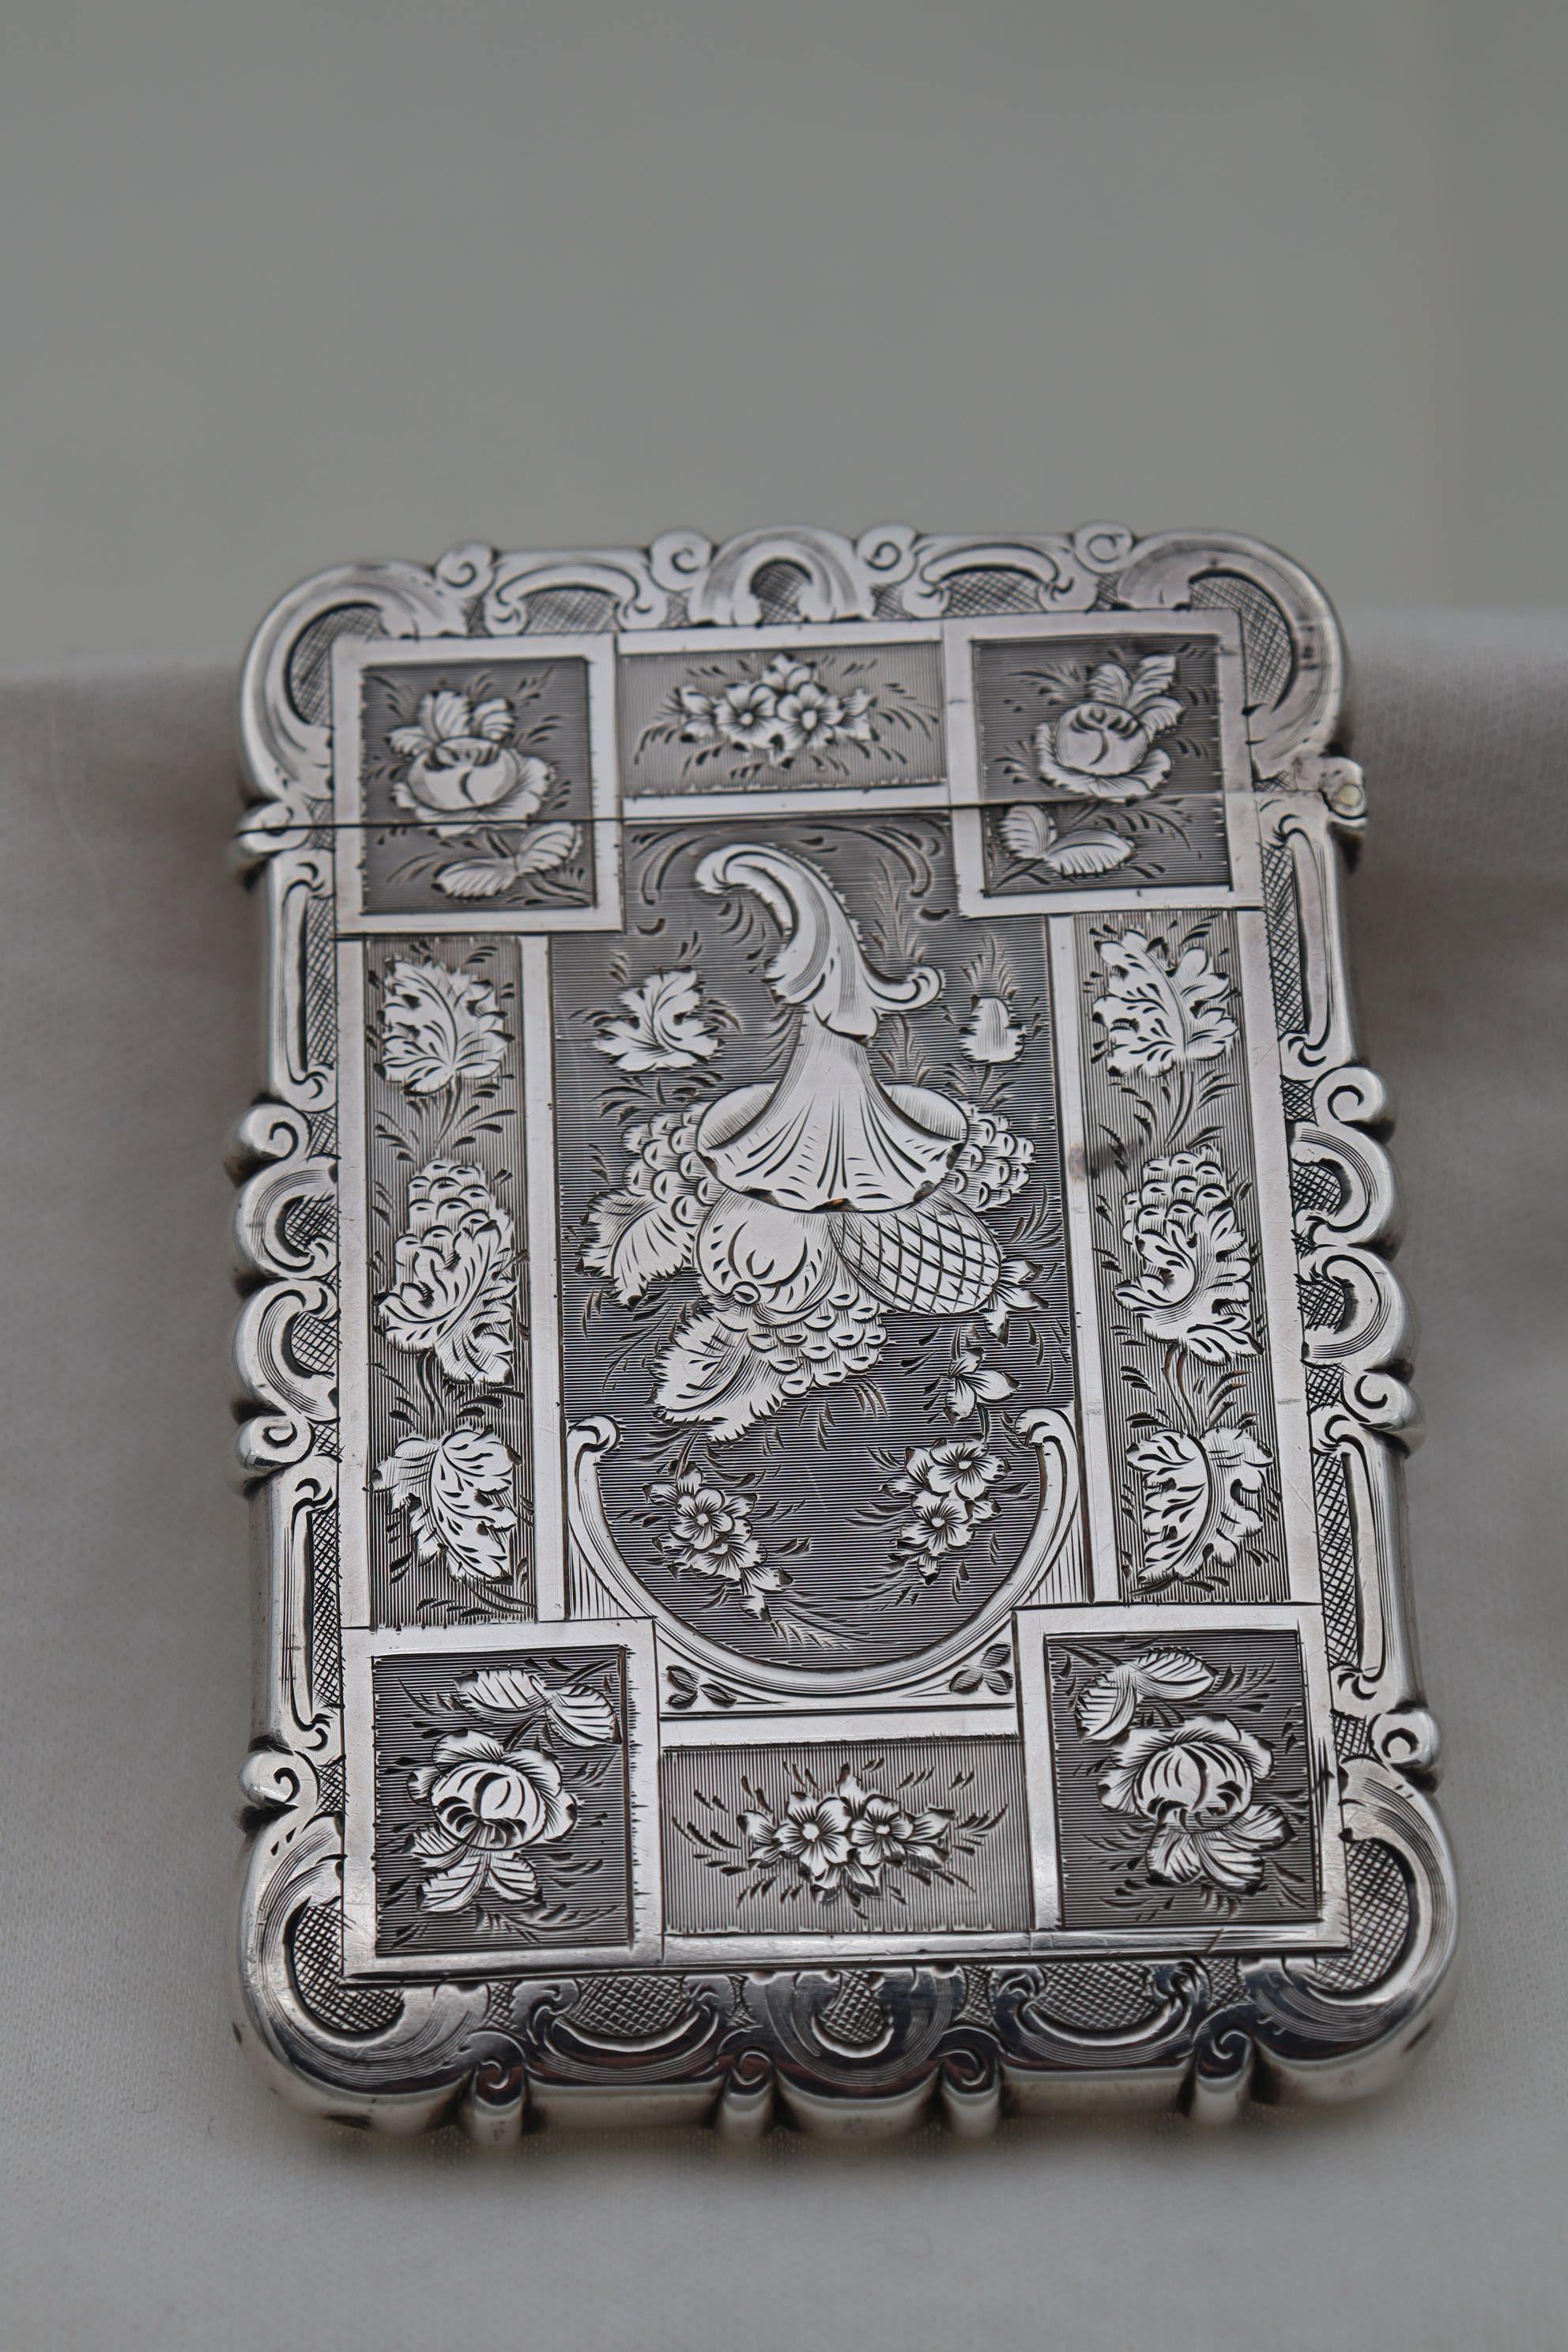 Mid-19th Century Sterling Silver Card Case by Edward Smith of Birmingham 1854